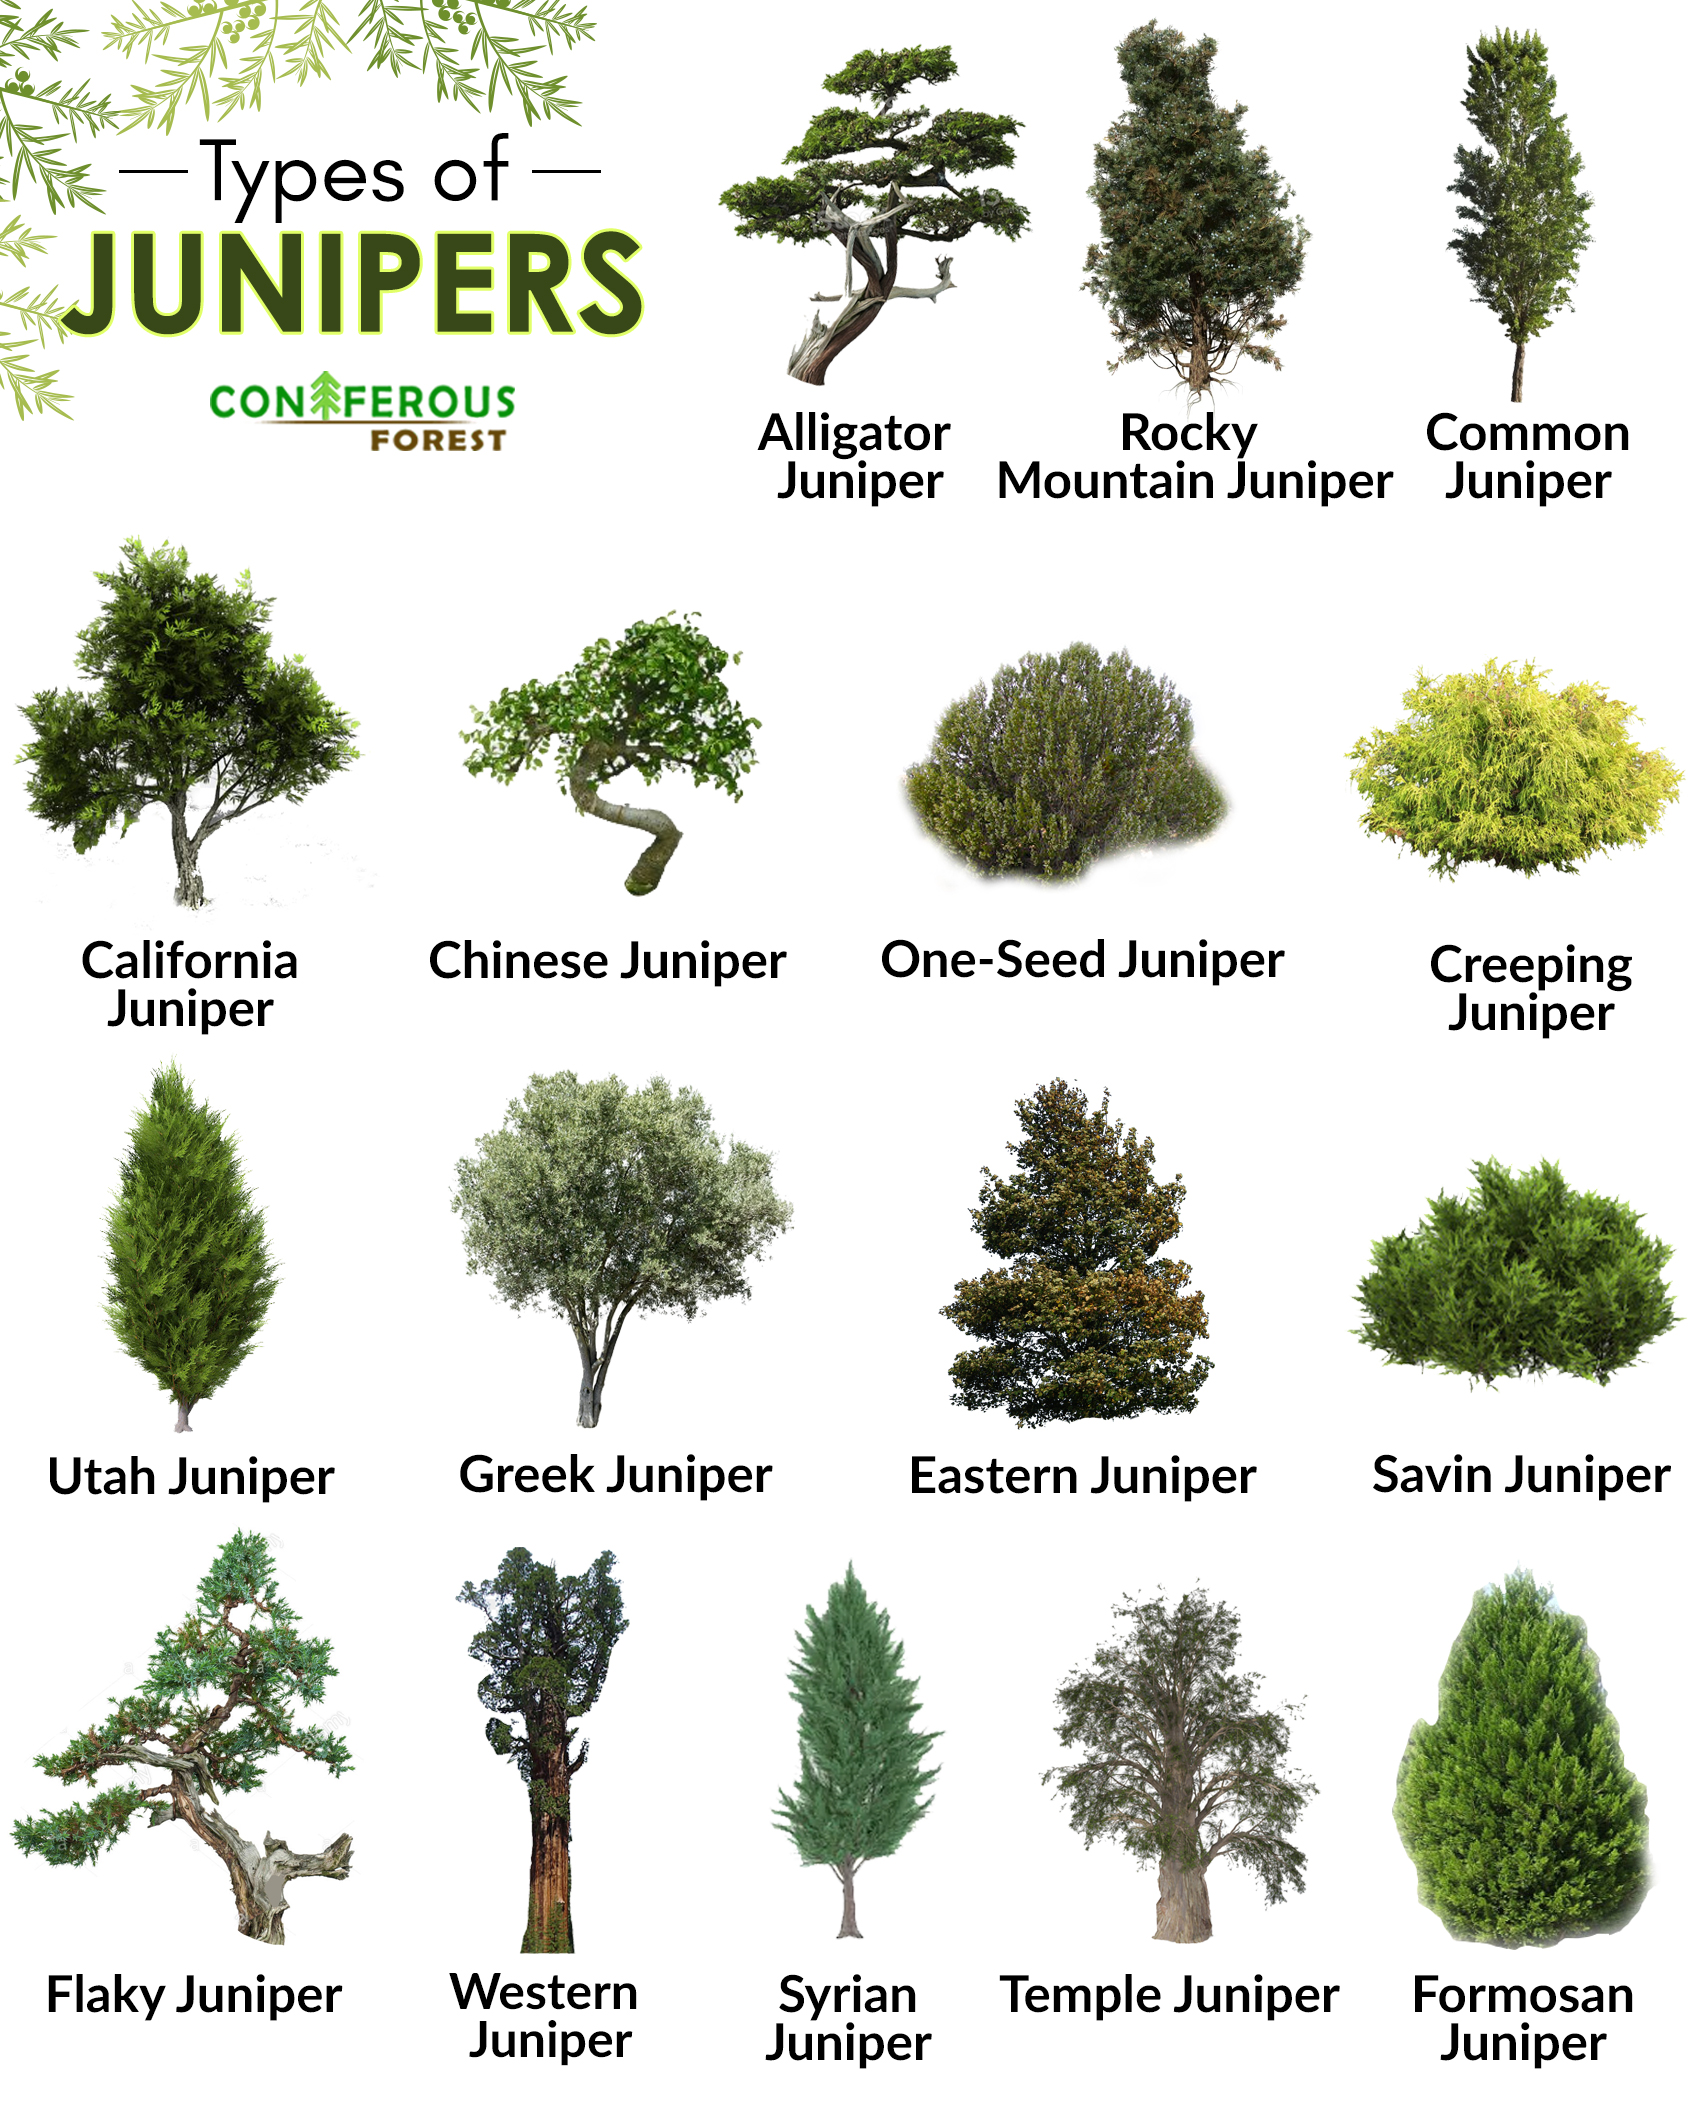 Juniper Tree Facts, Definition, Types, Identification, Pictures